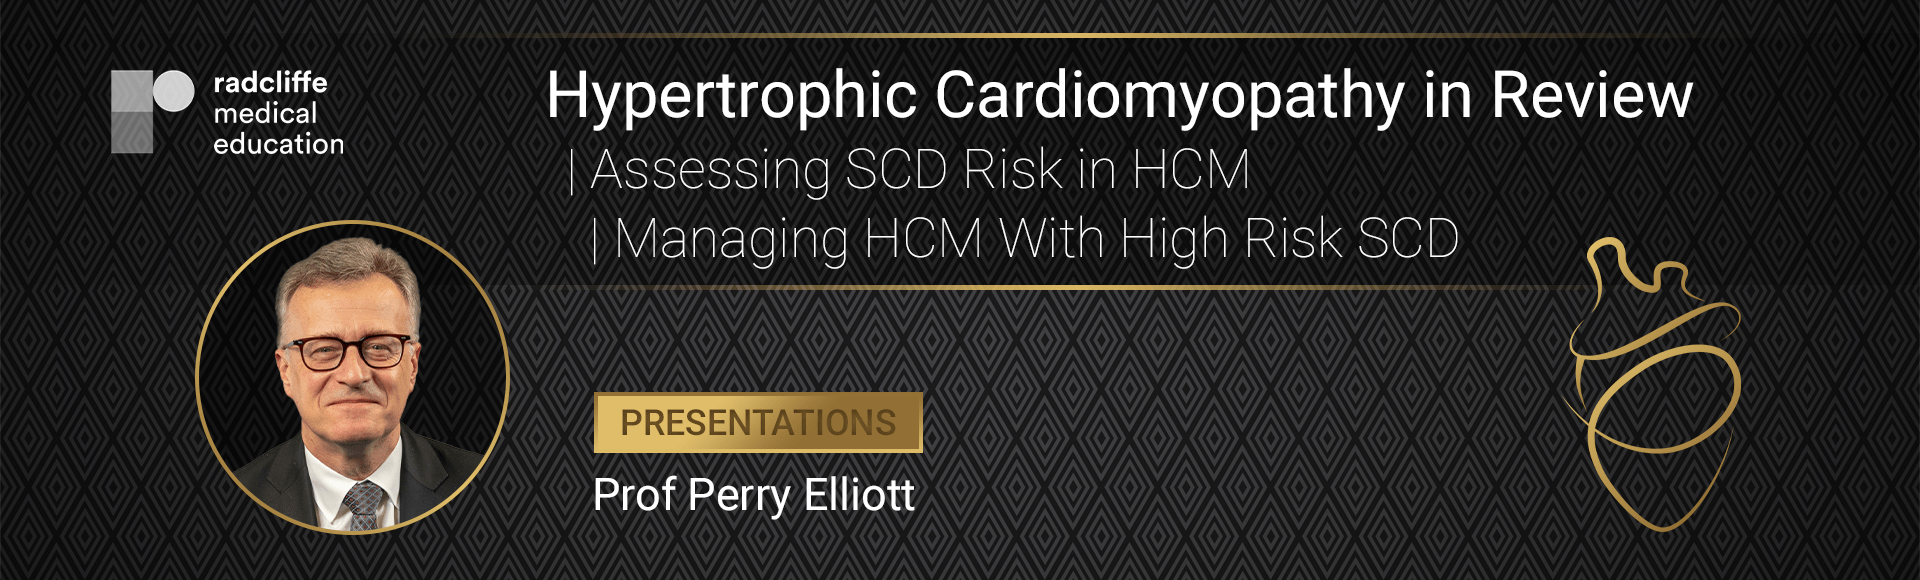 HCM in Review: Assessing SCD Risk in HCM & Managing HCM With High Risk SCD